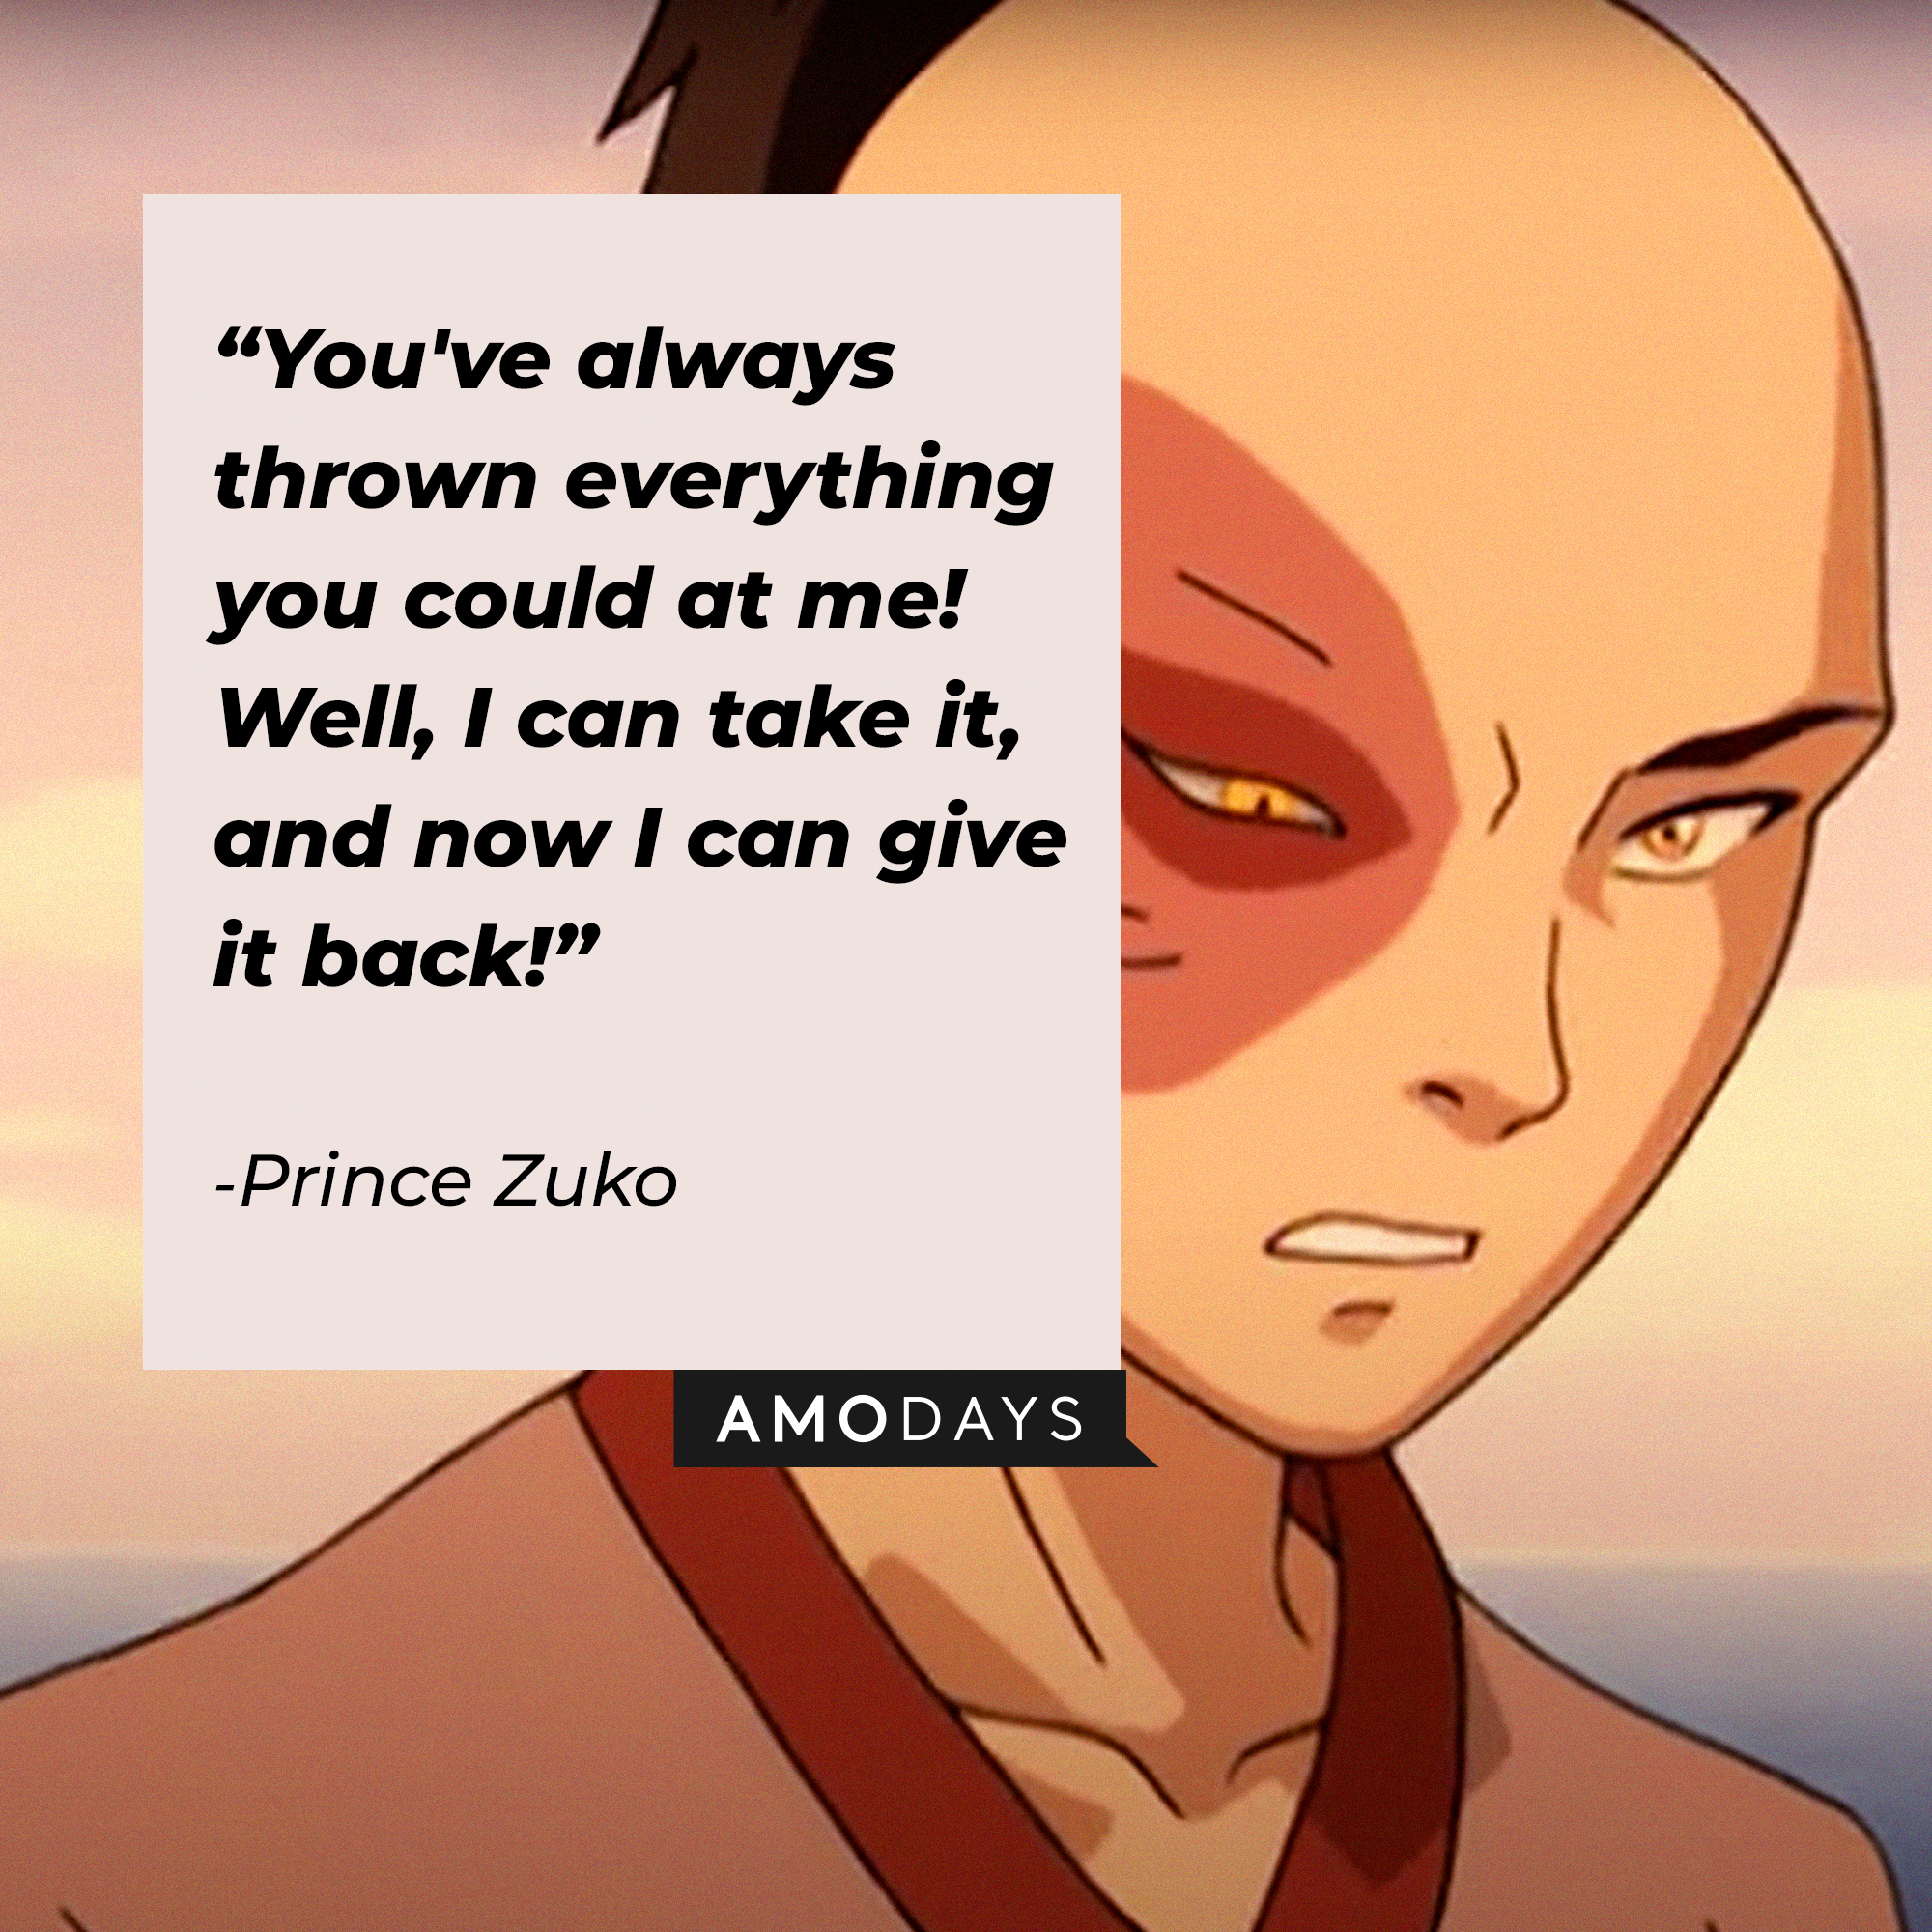 Zuko's quote: "You've always thrown everything you could at me! Well, I can take it, and now I can give it back!" | Source: youtube.com/TeamAvatar